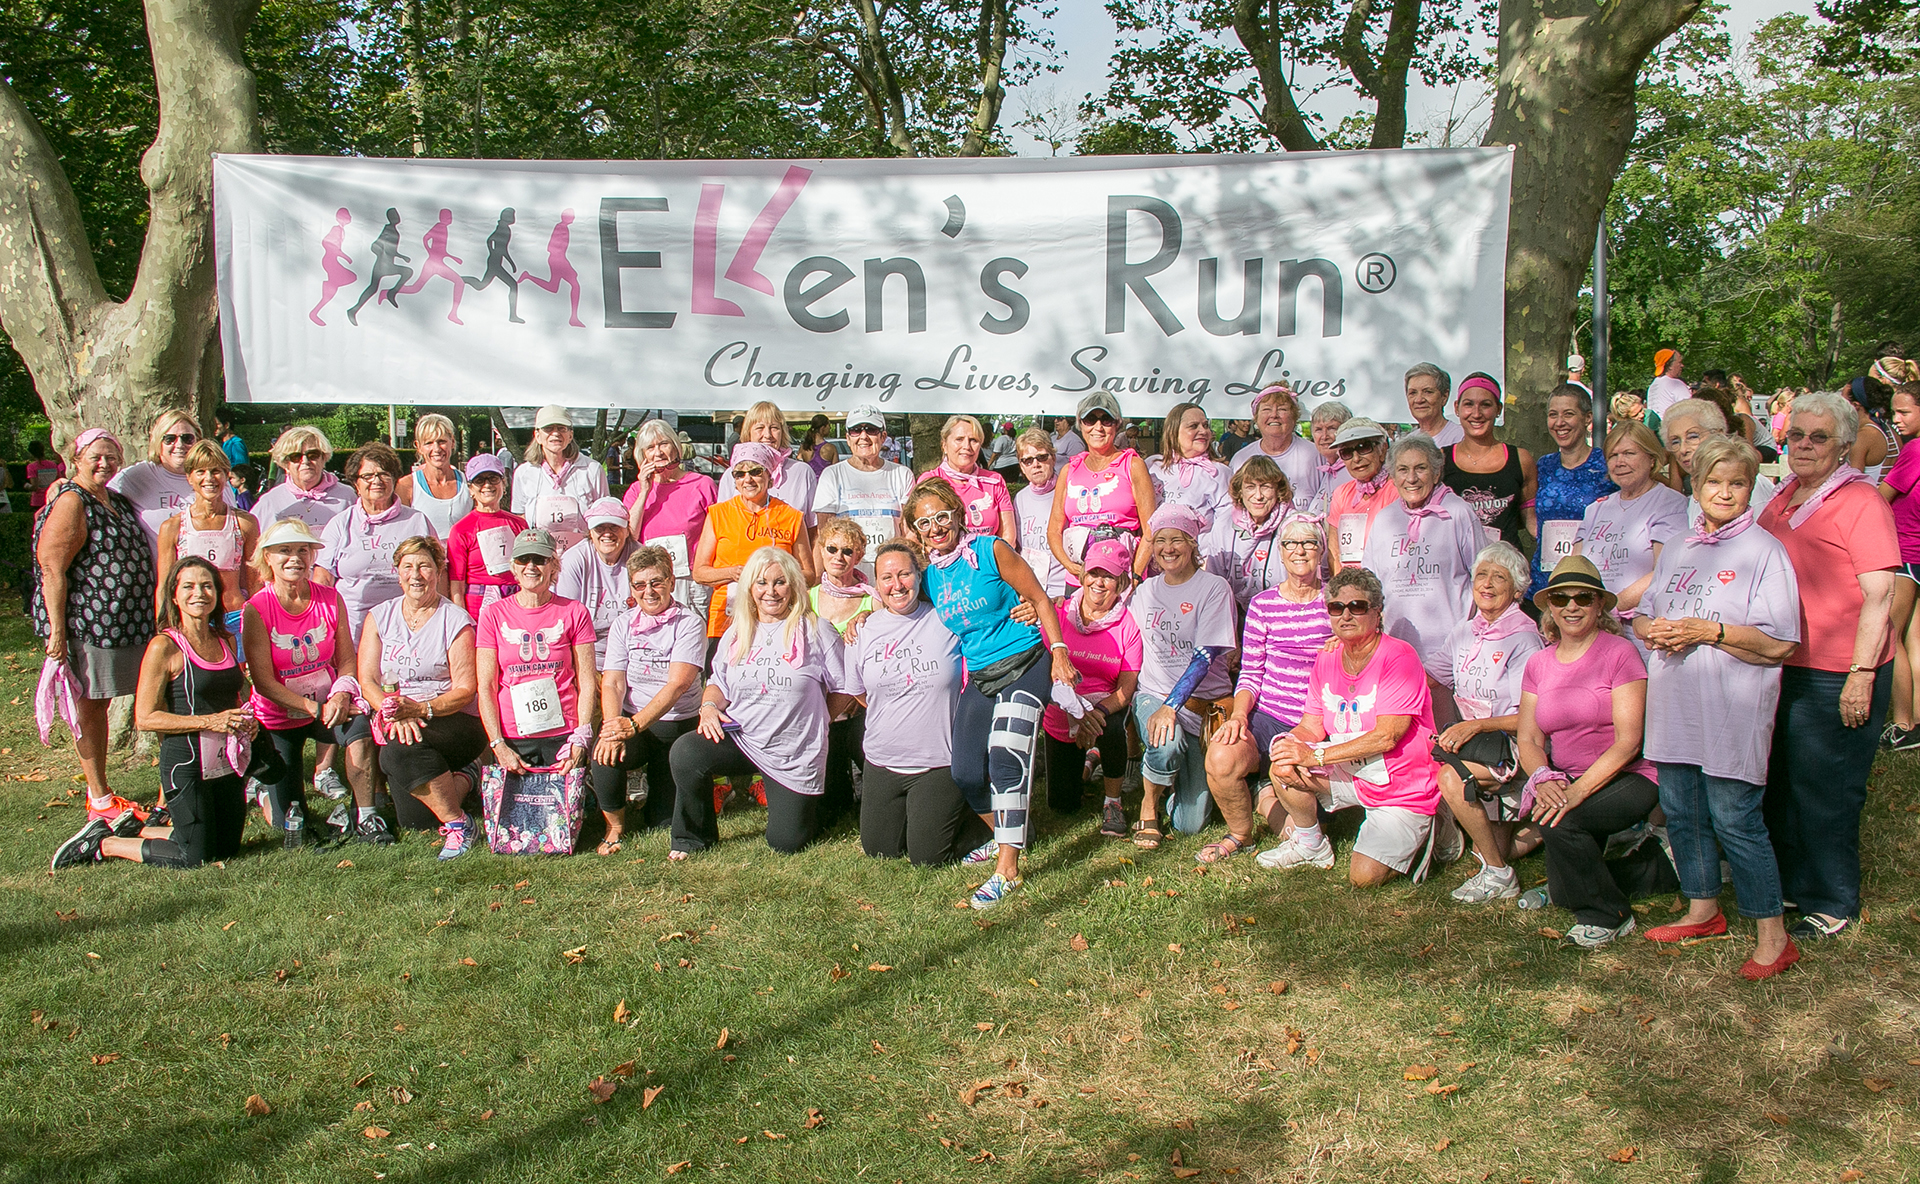 Ellen’s Run, a 5K now in its 24th year, has raised over $4 million for the Ellen Hermanson Foundation, which supports breast cancer research and prevention efforts, as well as emotional support for patients and their families.